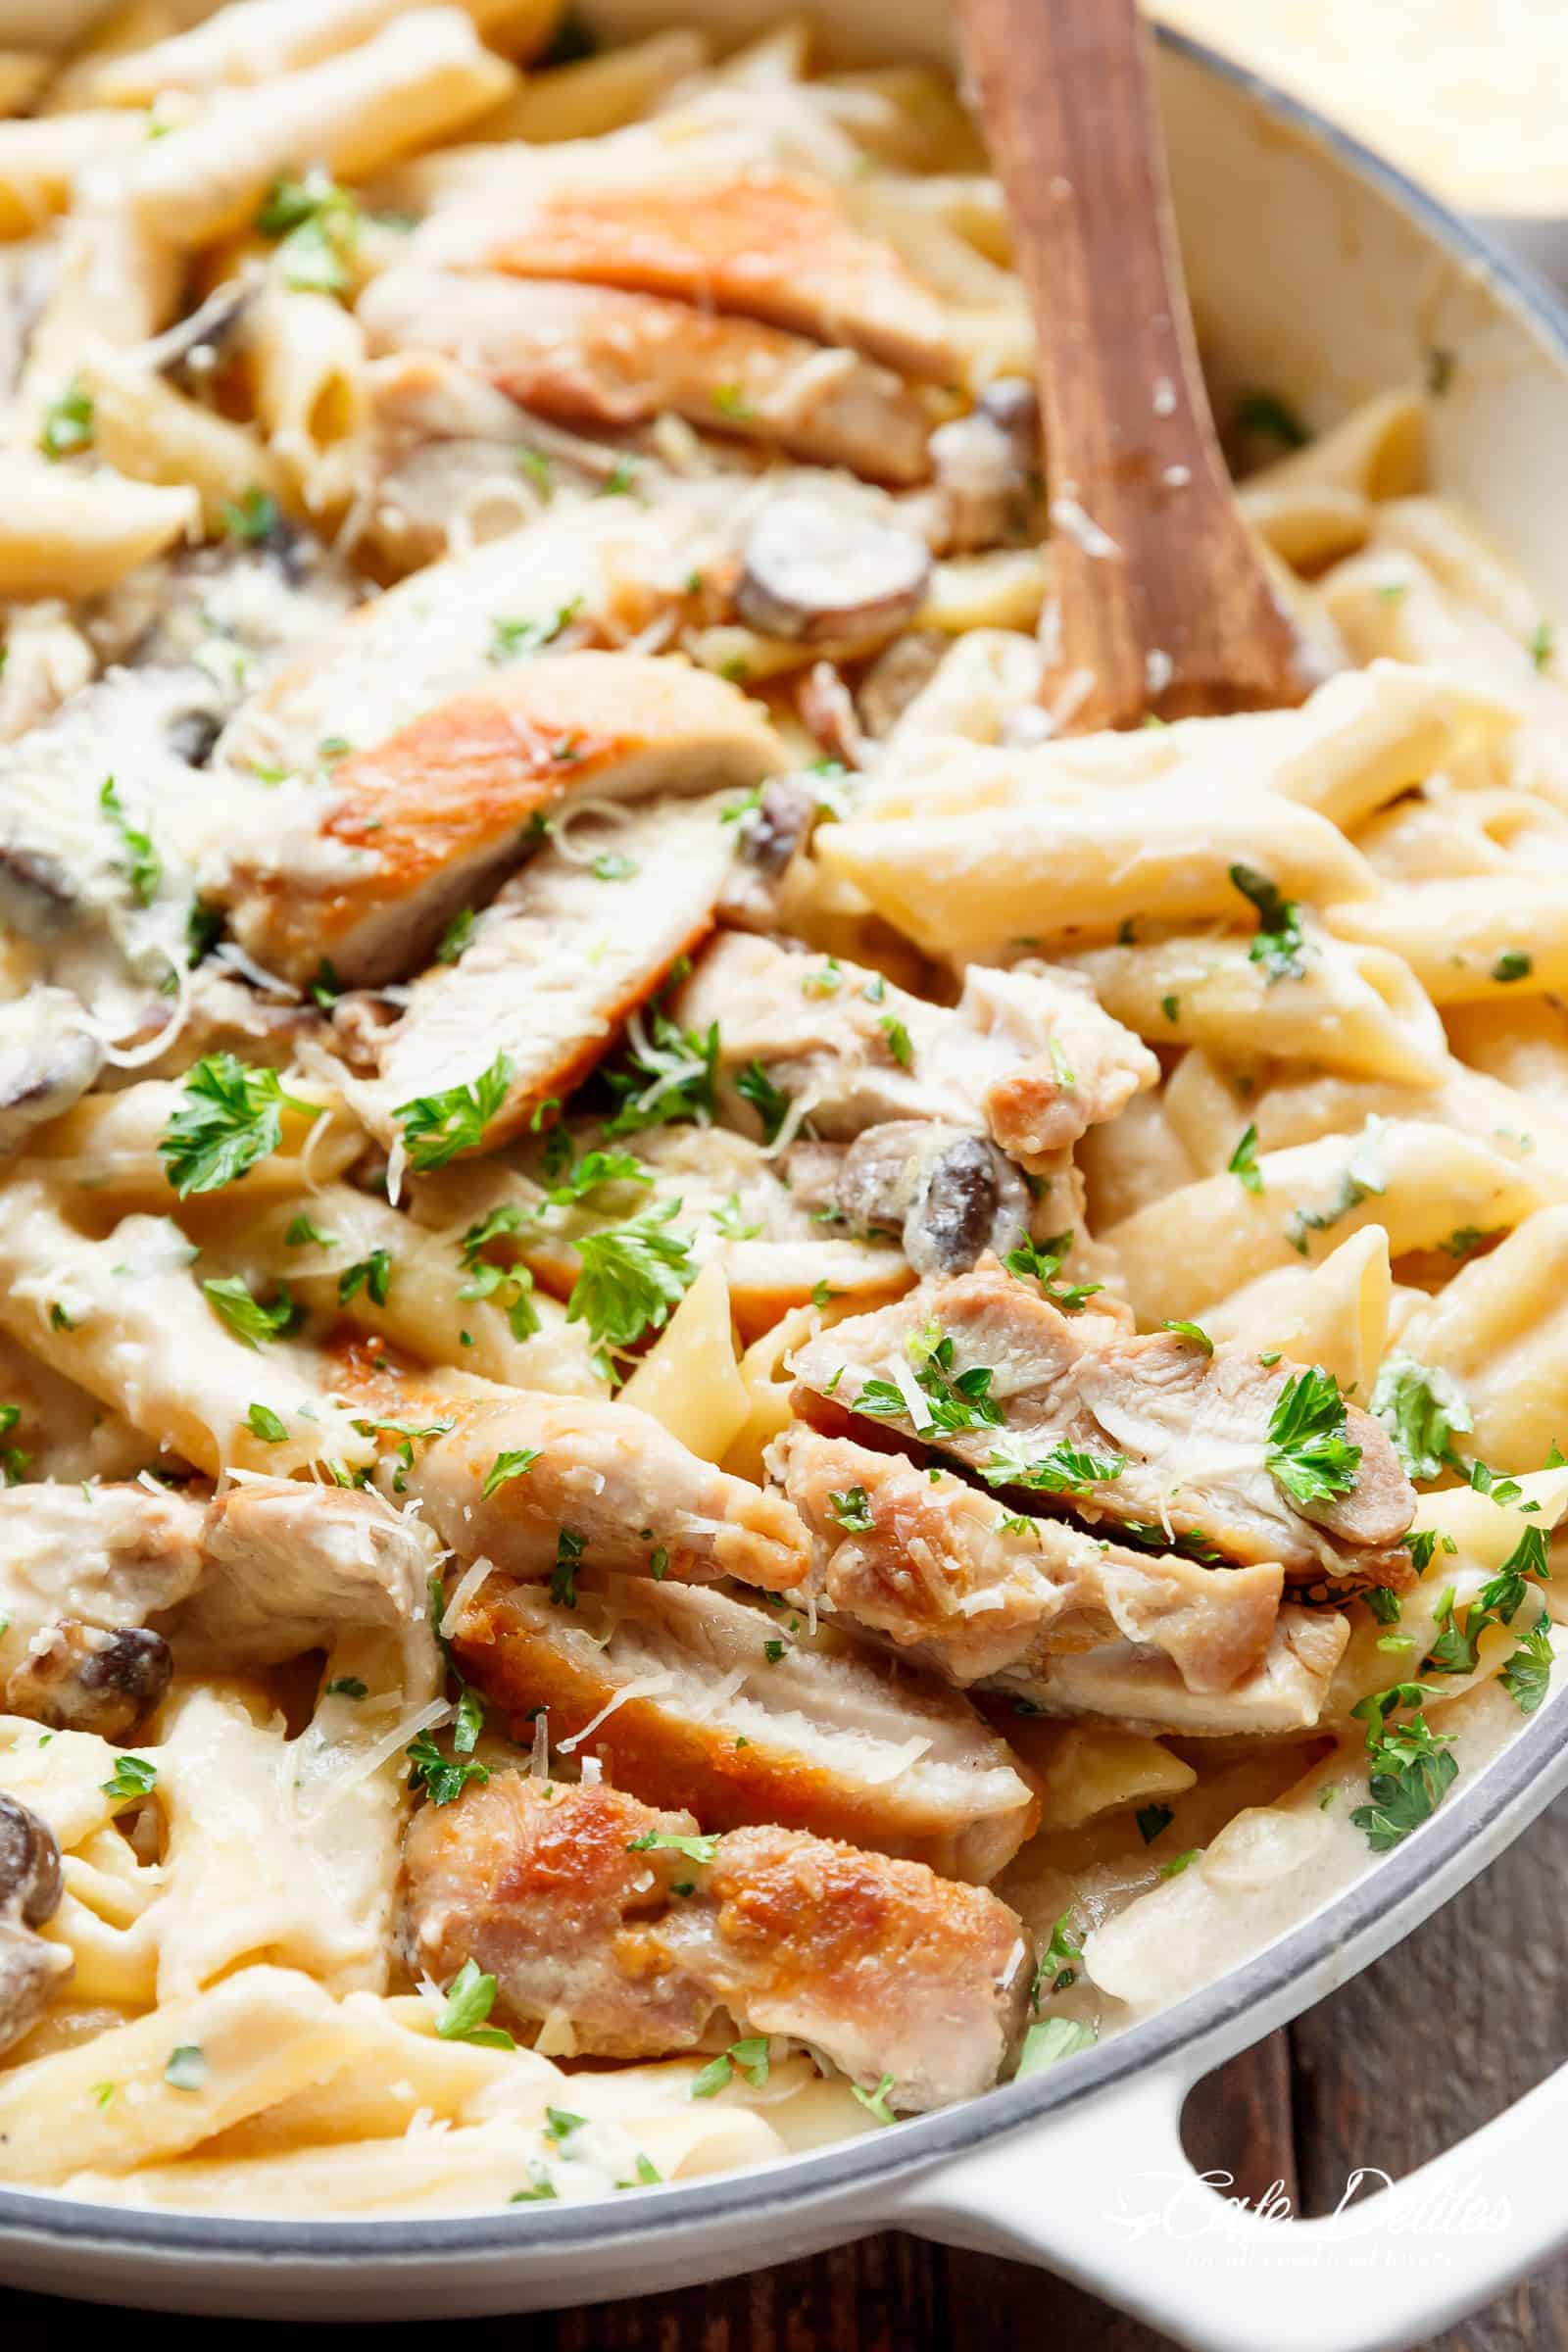 Creamy Garlic Parmesan Chicken Alfredo is all cooked in ONE POT! Ready and on the table in less than 20 minutes! Seared chicken is mixed through a super creamy garlic parmesan flavoured pasta with white wine and mushrooms! A favourite Chicken Alfredo recipe! | cafedelites.com